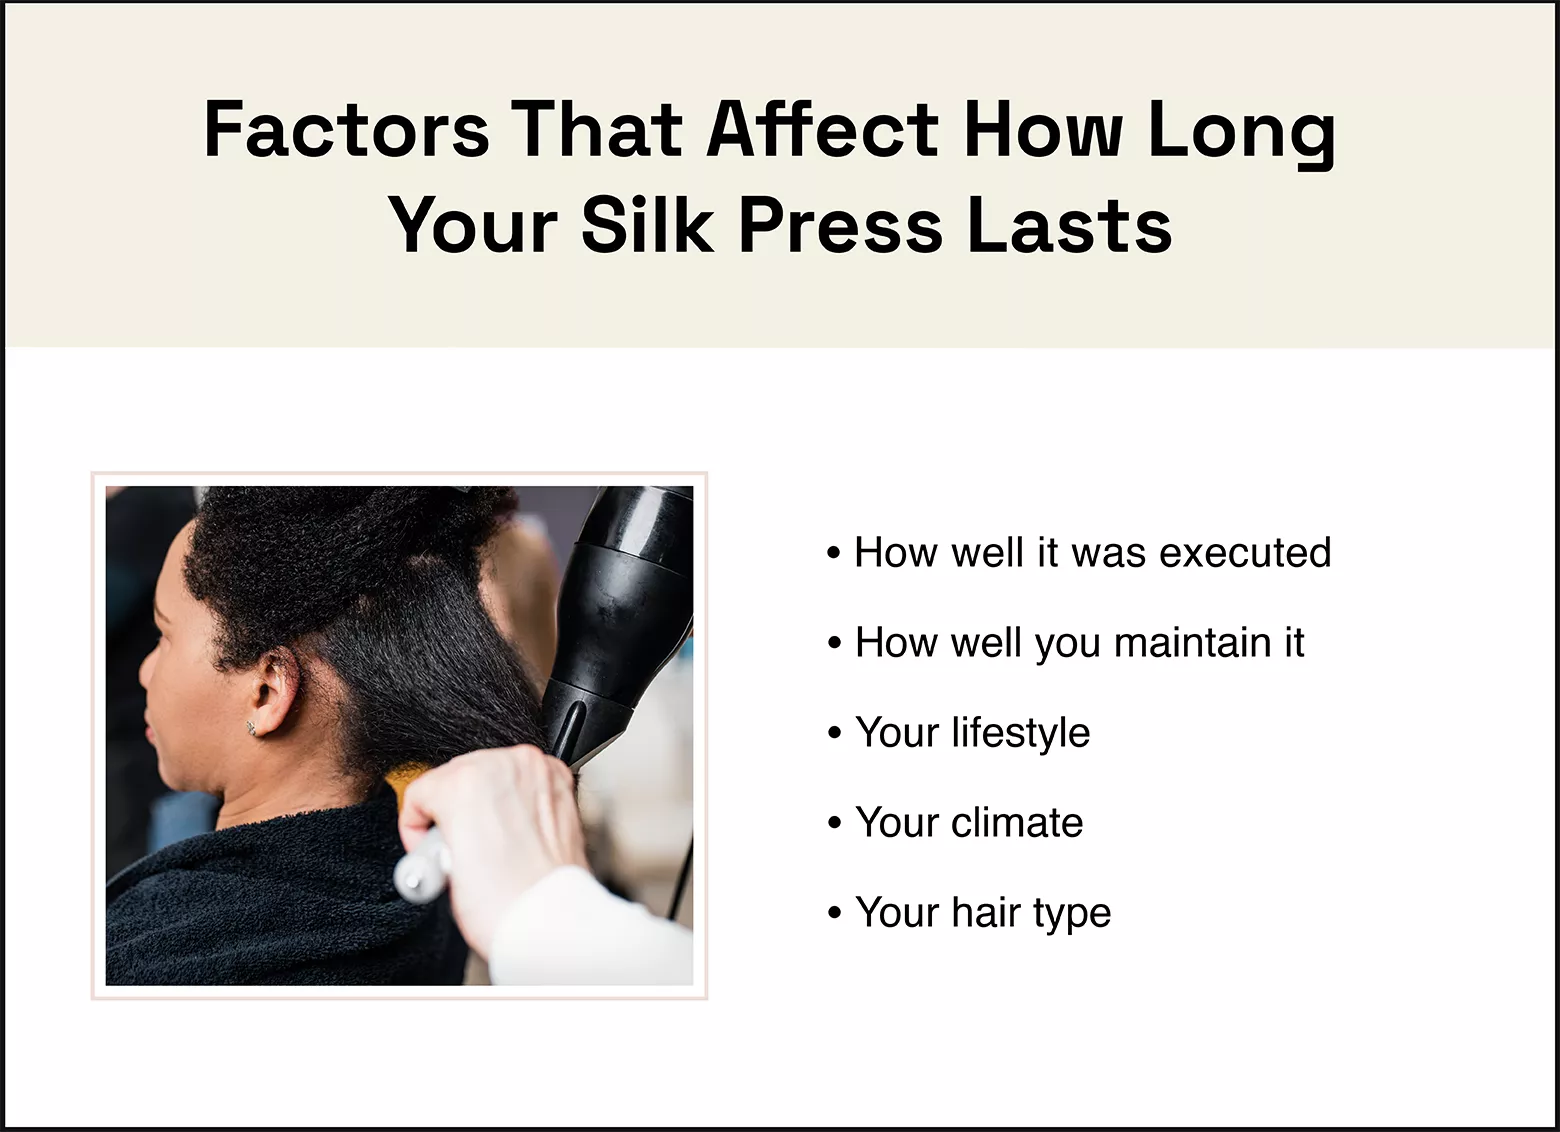 photo on the left of a stylist blow-drying a client’s natural hair, bulleted list on the right summarizing factors that affect how long a silk press can last